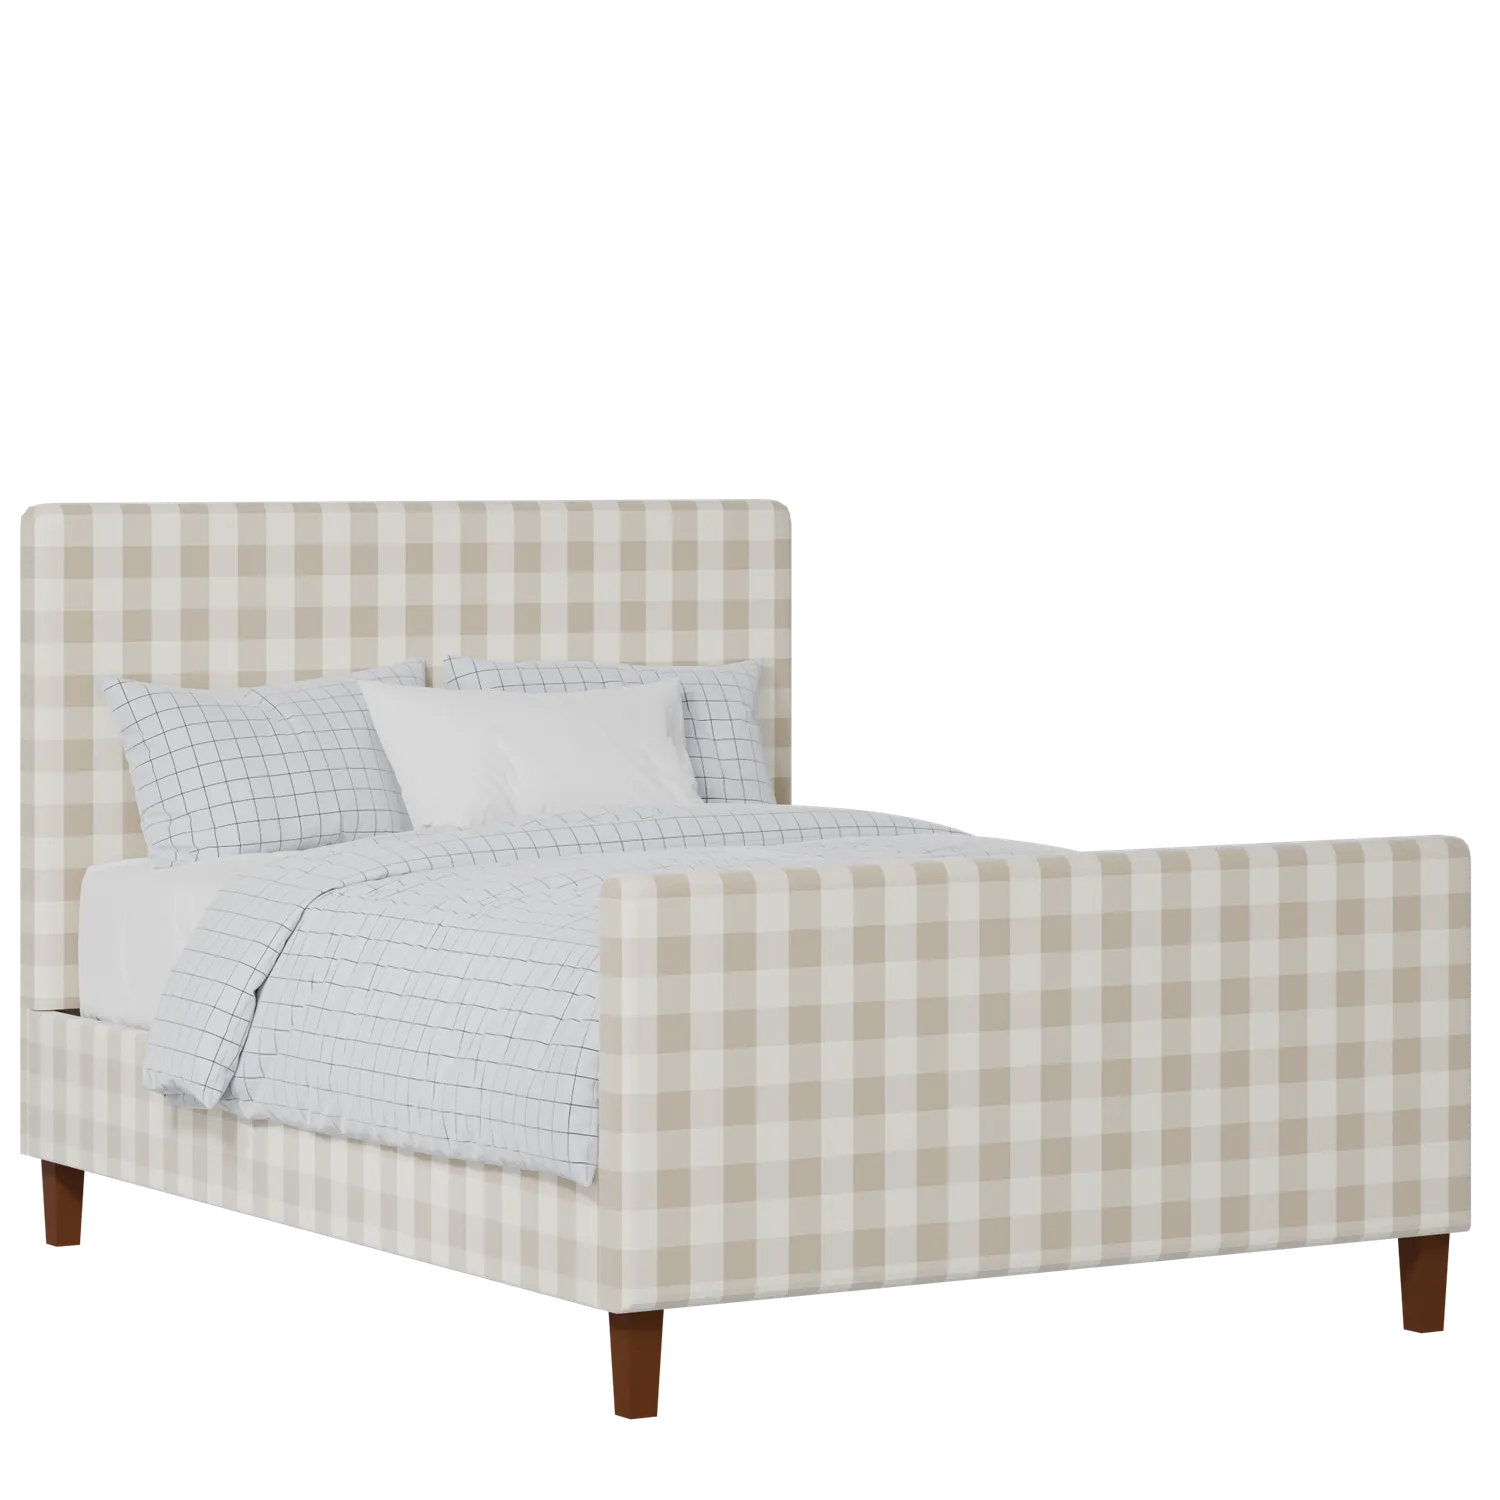 Porto upholstered bed in Romo Kemble Putty fabric with Juno mattress